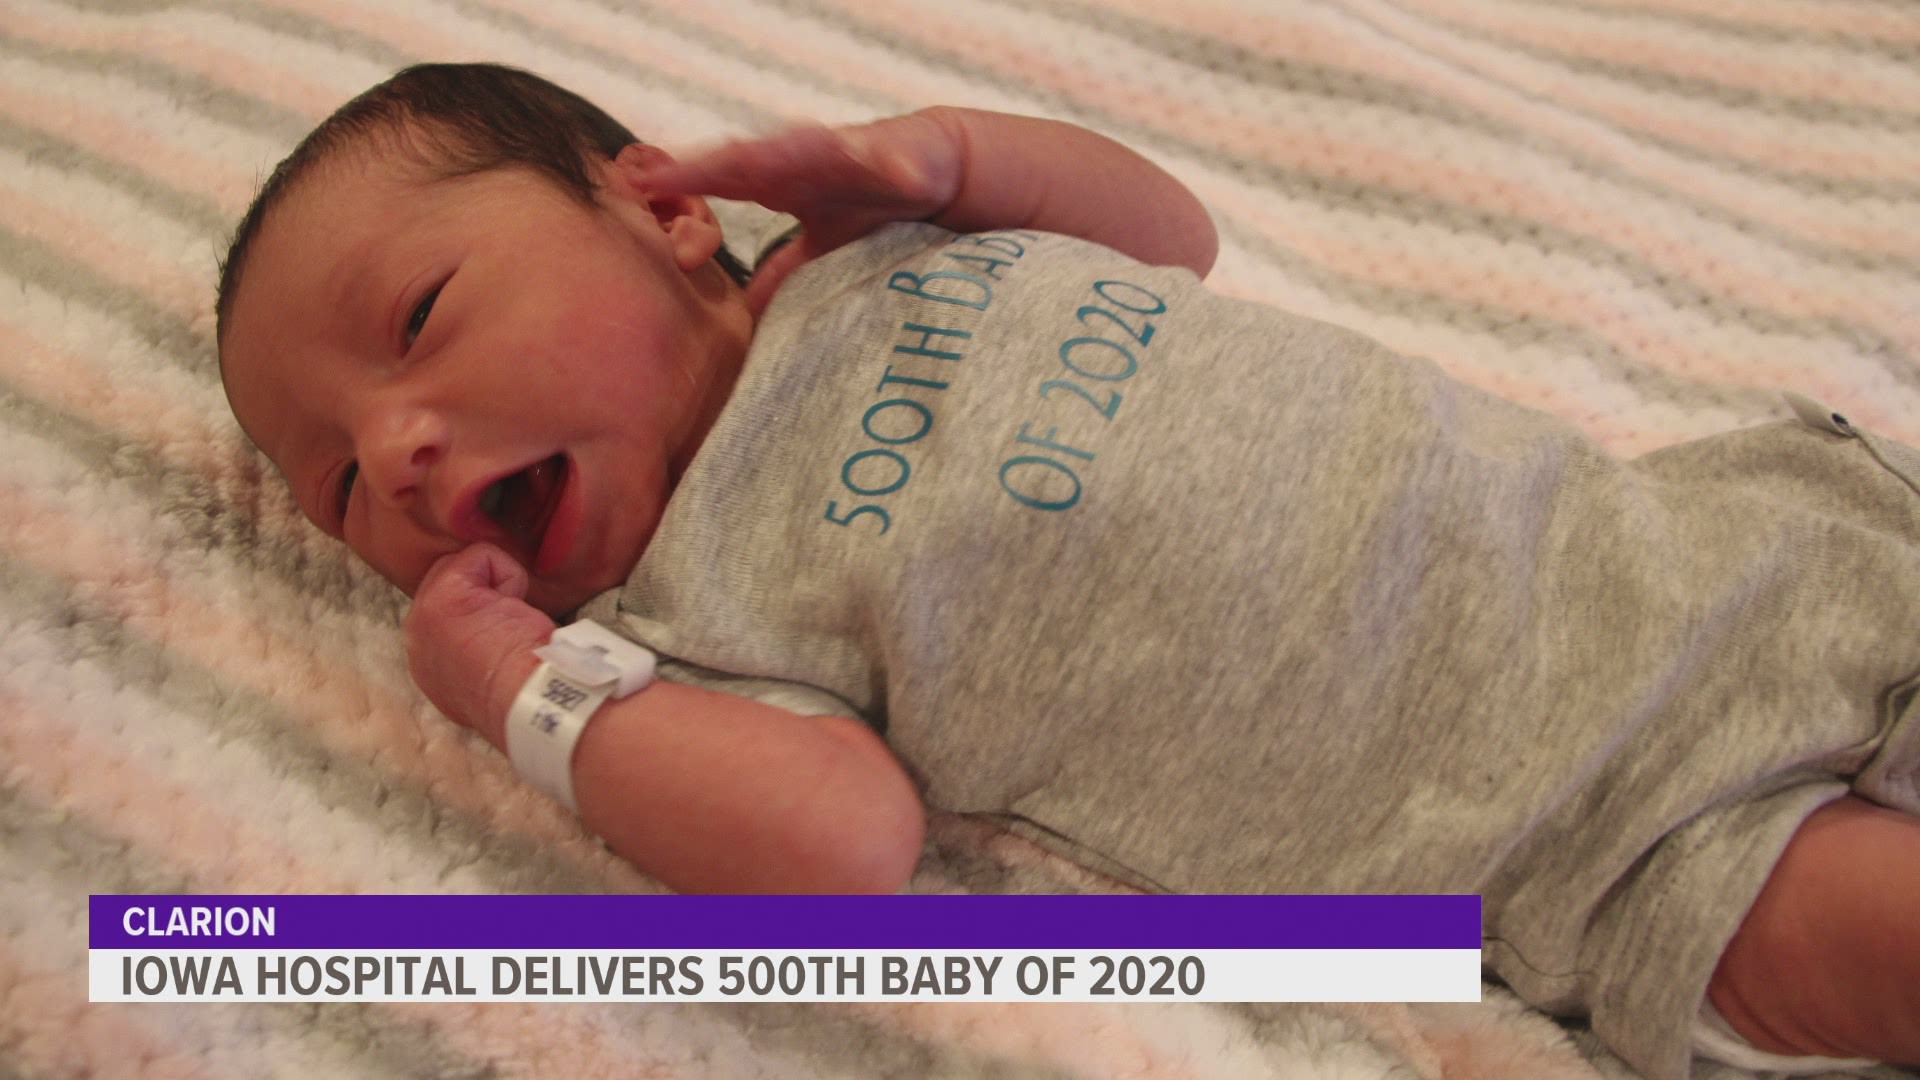 Elena Leal was born December 27, and marks the 500th delivery at Iowa Specialty Hospitals and Clinics.